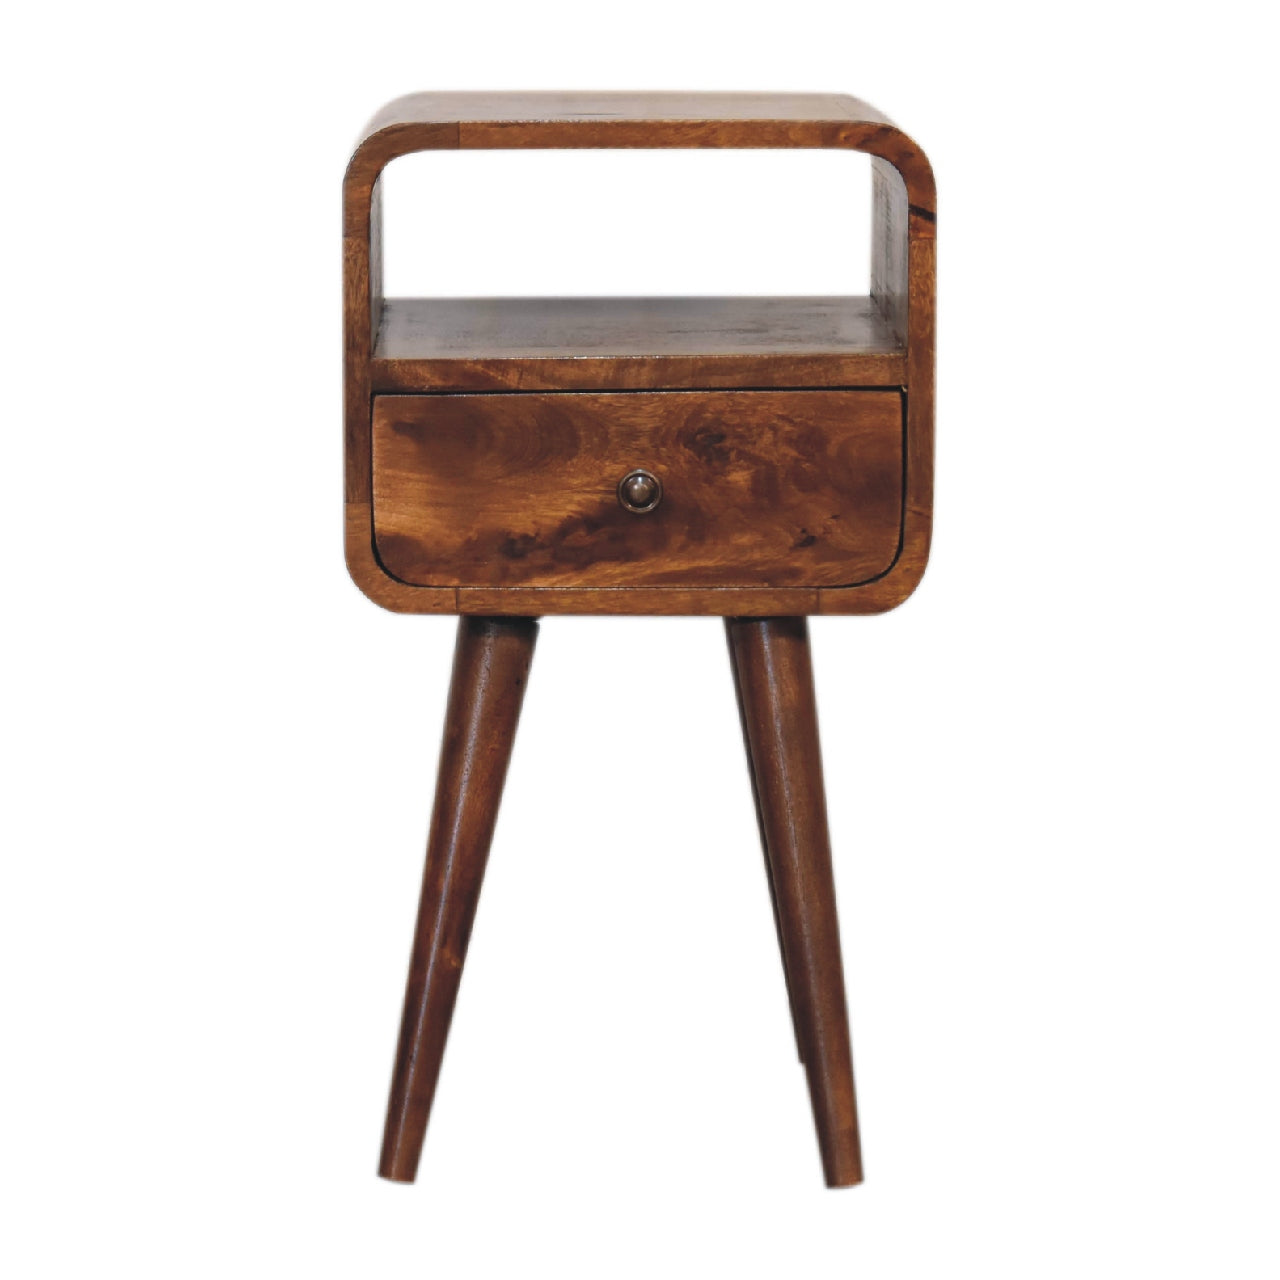 View Mini Chestnut Curved Bedside with Open Slot information